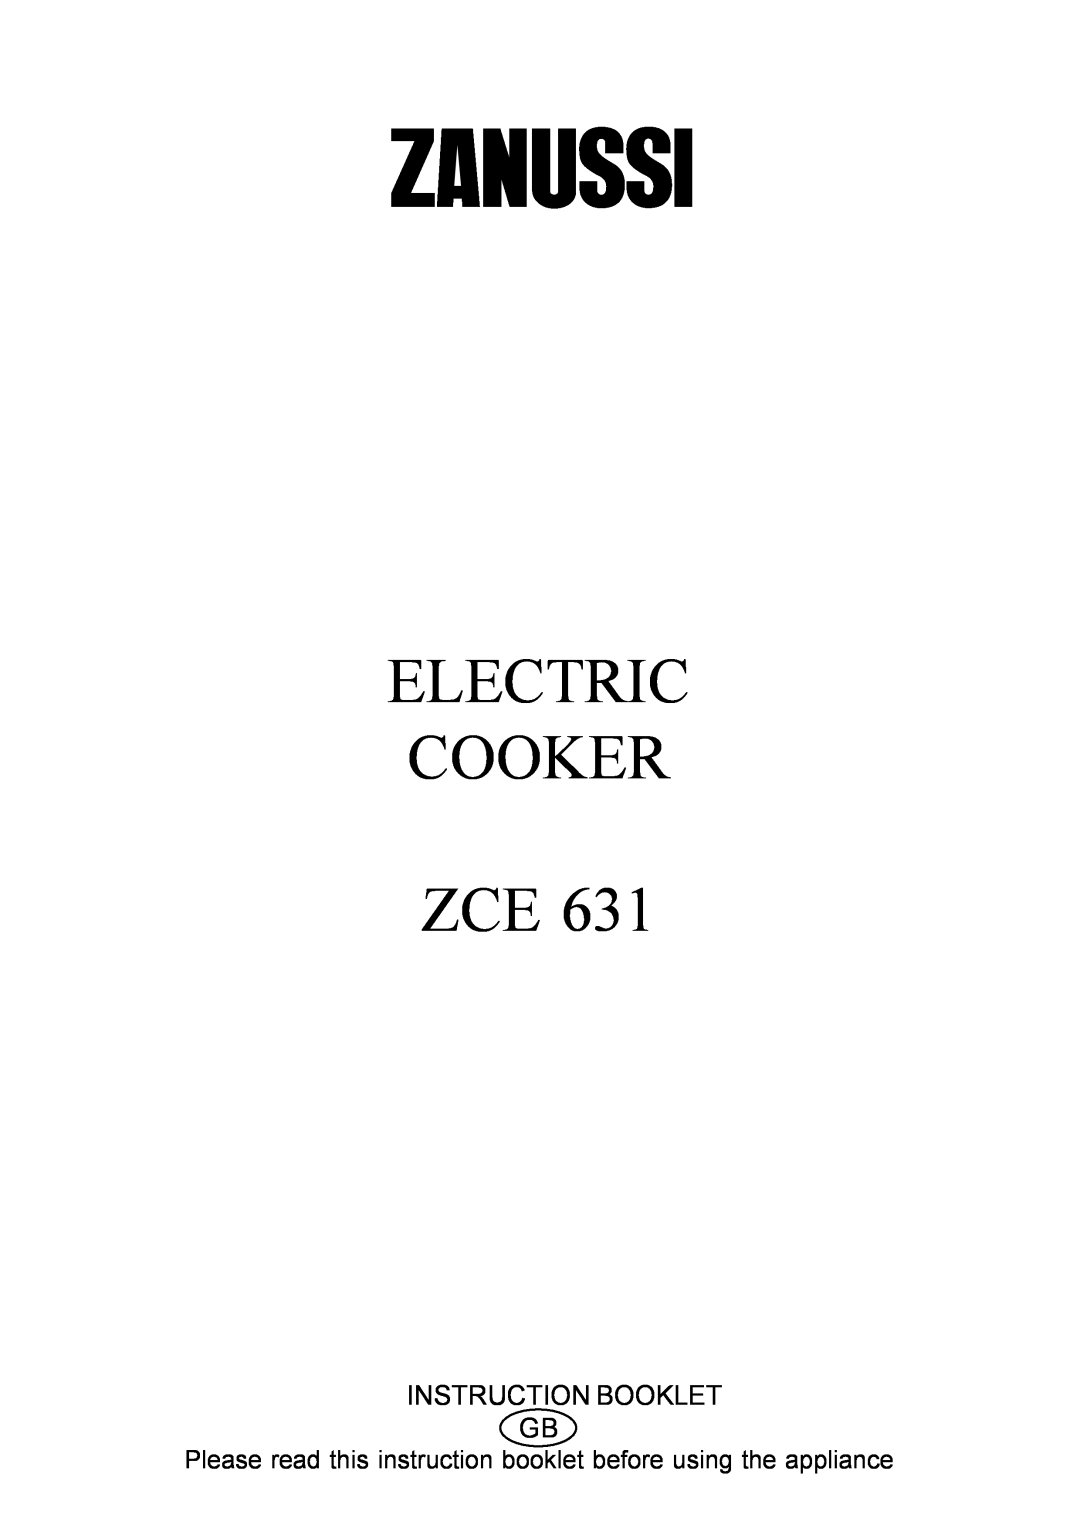 Zanussi ZCE 631 manual Please read this instruction booklet before using the appliance, Electric Cooker Zce 